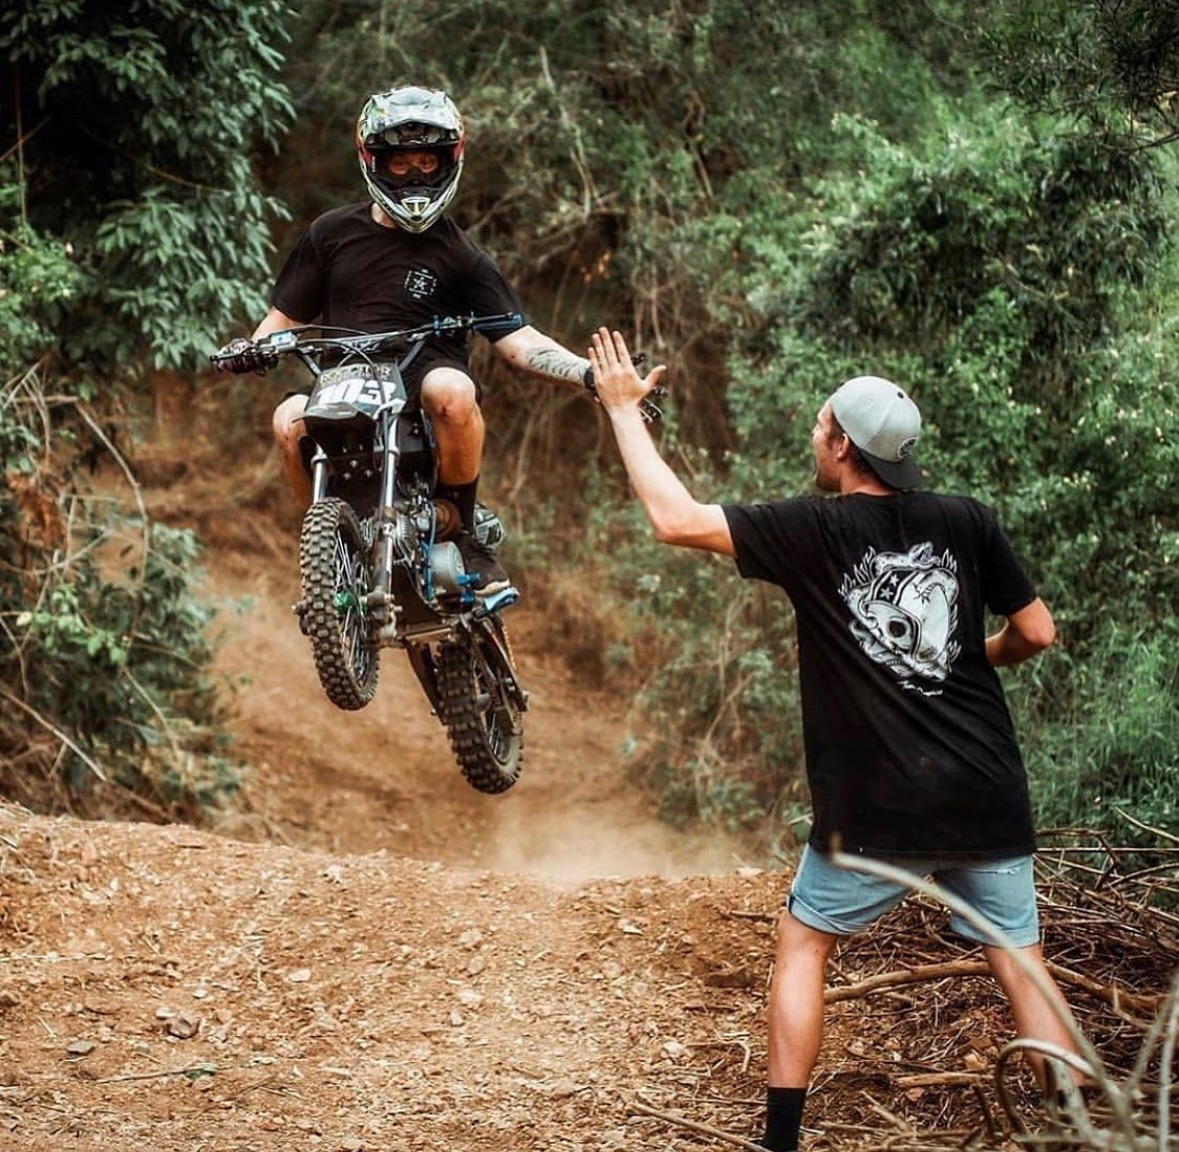 Did you have a good weekend? 🤩
—
#ycf #moto #motocross